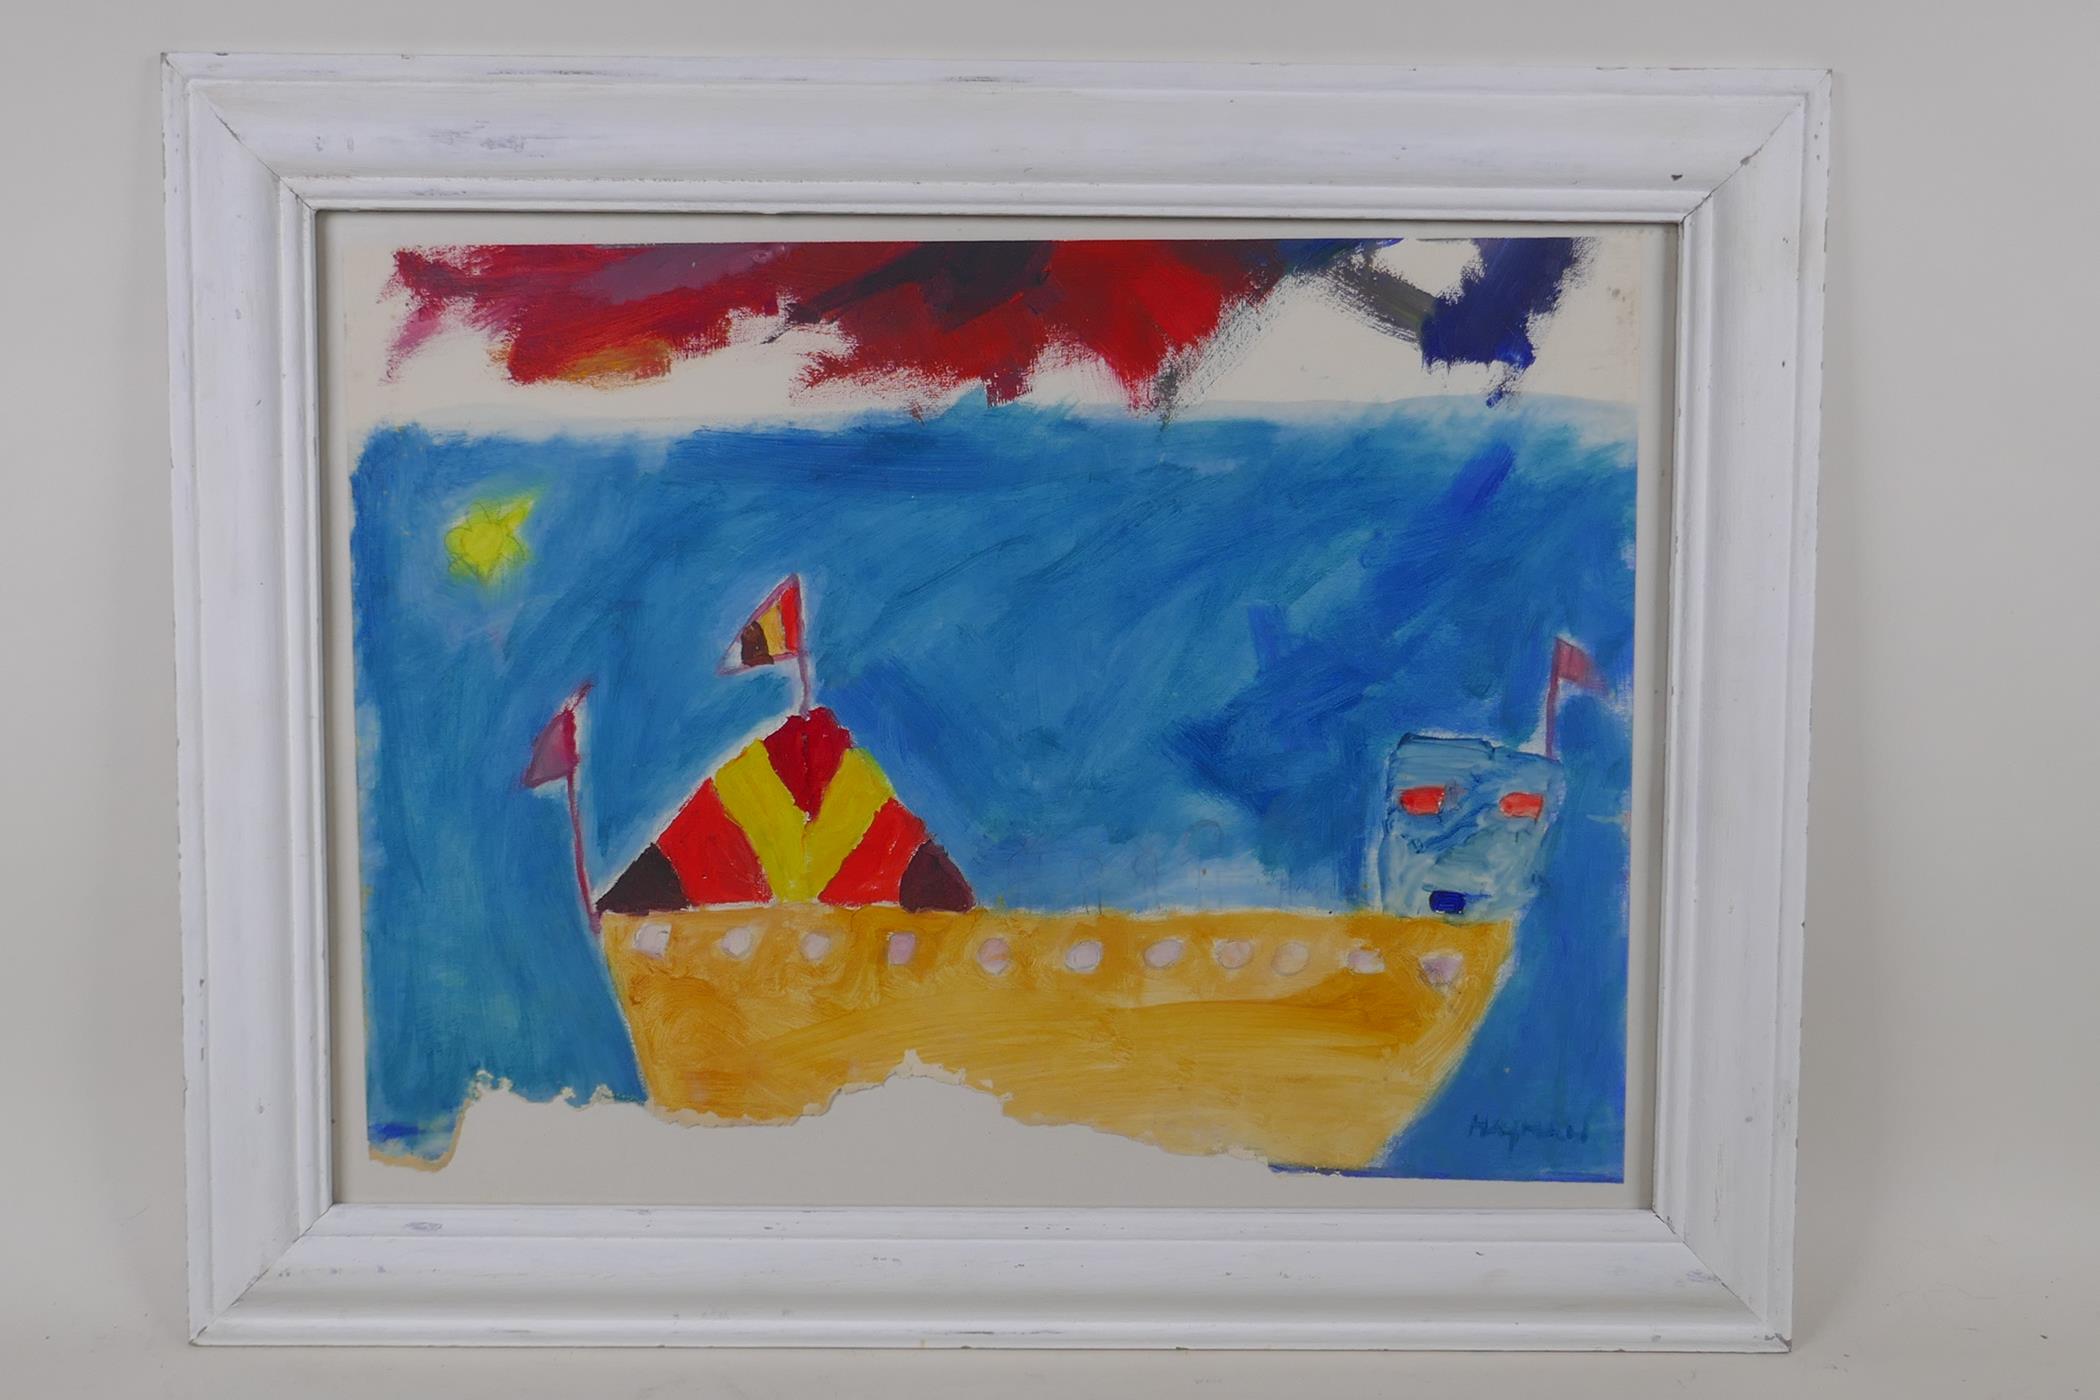 Study of a boat, indistinctly signed, naive style mixed media painting on paper fragment, 38cm x - Image 2 of 4